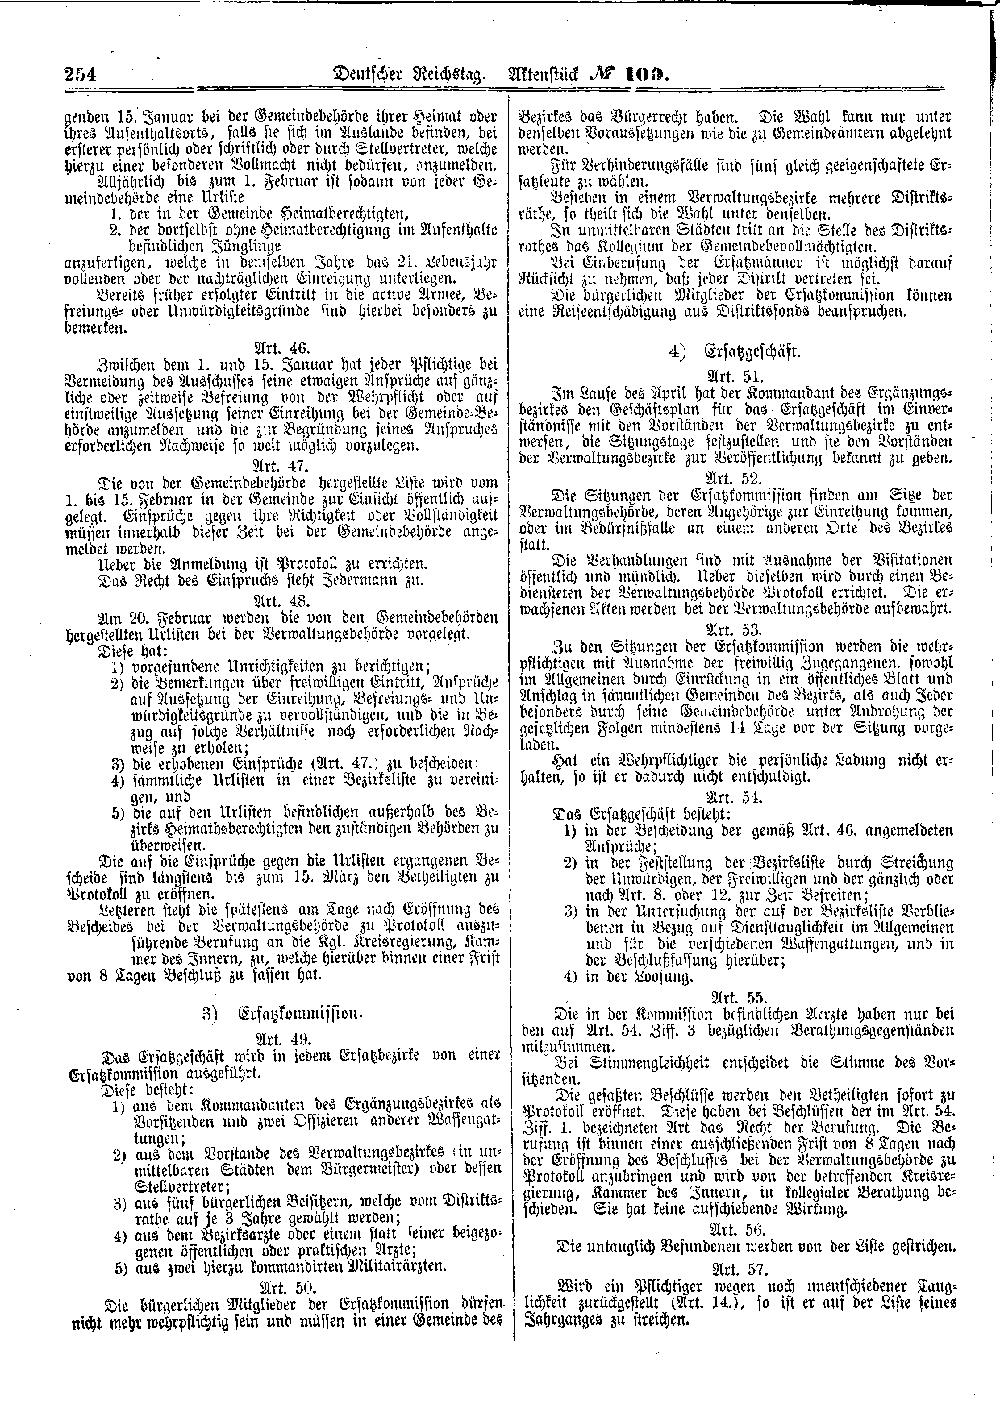 Scan of page 254